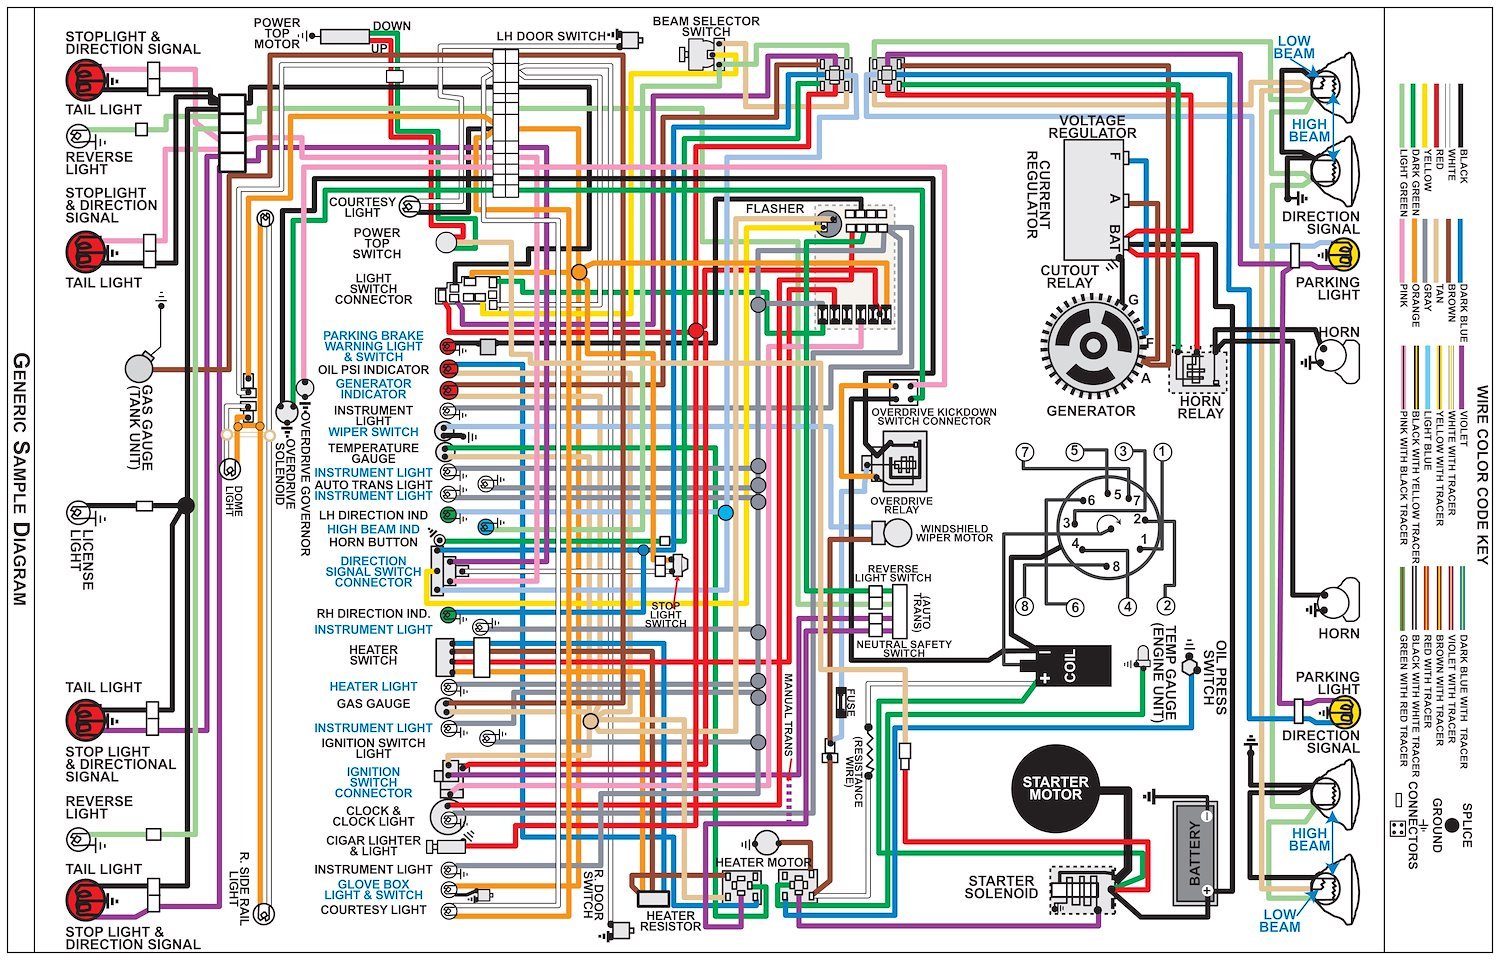 Wiring Diagram for 1978 Dodge D, W Series Trucks, 11 in x 17 in., Laminated